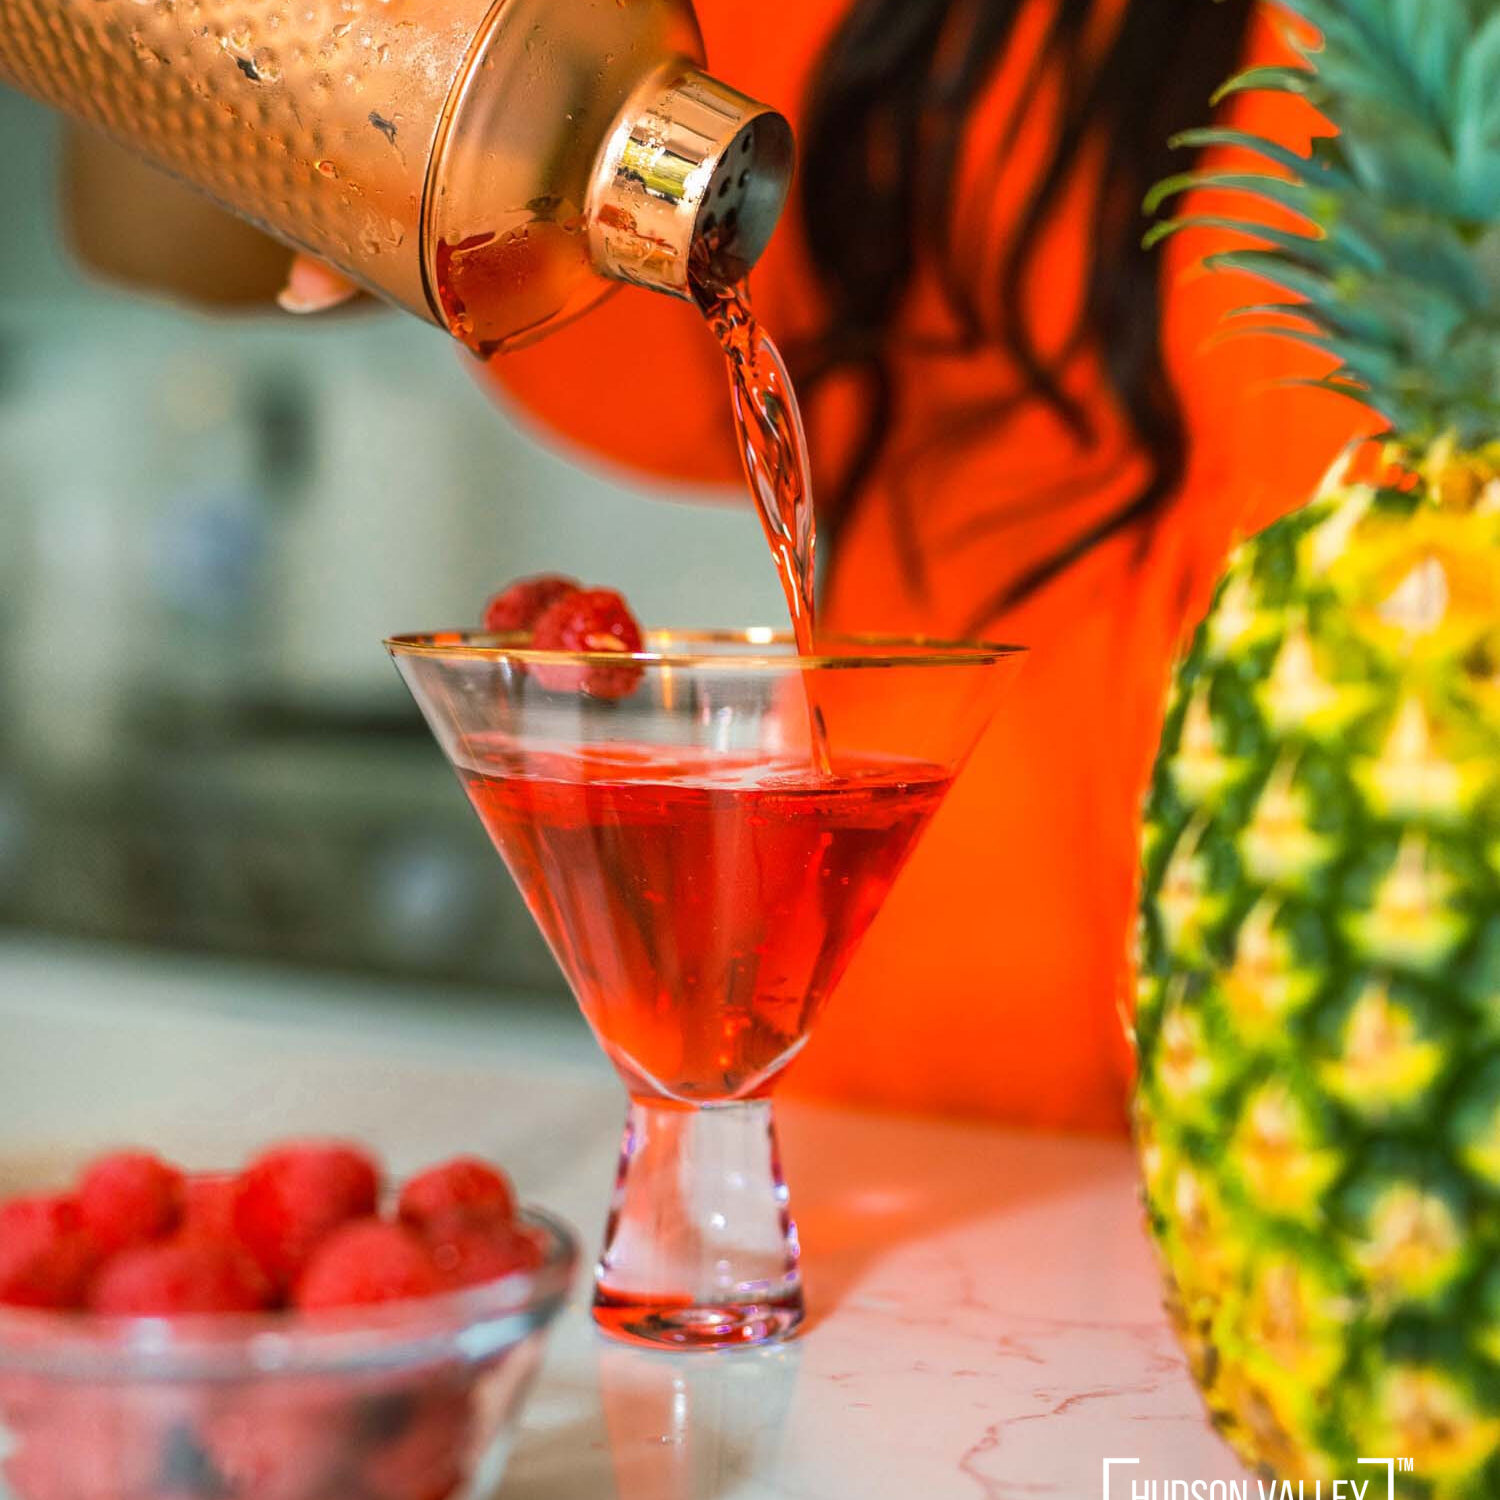 Hudson Valley Style Mixology with Jessica Mojica: The Poolside French Martini with a Tropical Pineapple Twist – Presented by Alluvion Media – Luxury Hospitality Photography in the Hudson Valley, Catskills and Hamptons